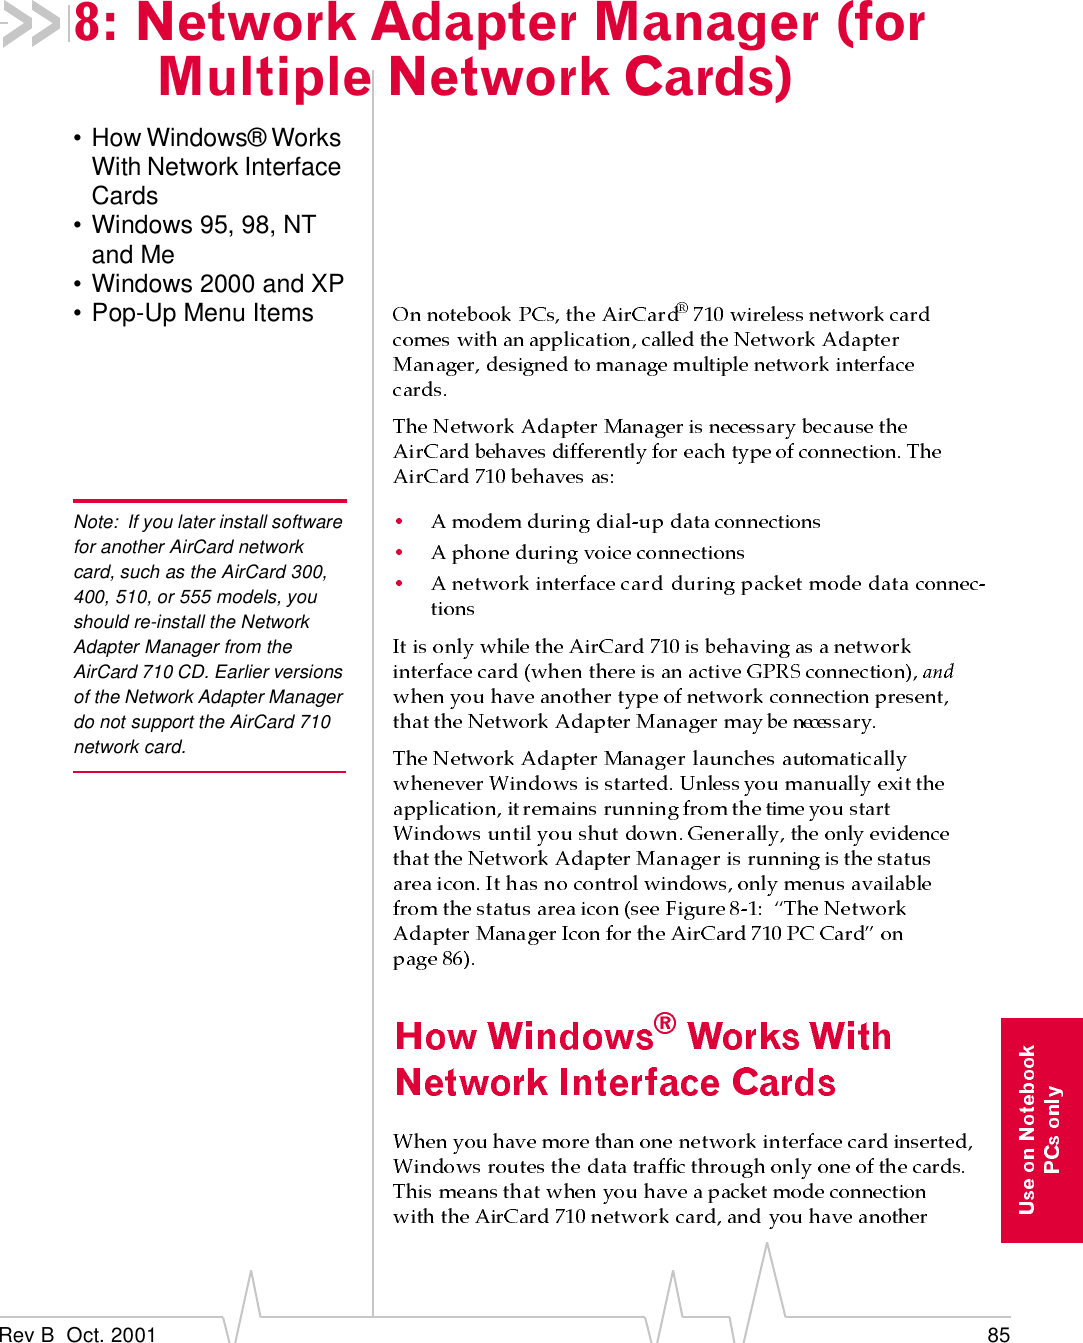 Rev B  Oct. 2001 858: Network Adapter Manager (for Multiple Network Cards)• How Windows® Works With Network Interface Cards• Windows 95, 98, NT and Me• Windows 2000 and XP• Pop-Up Menu ItemsNote: If you later install software for another AirCard network card, such as the AirCard 300, 400, 510, or 555 models, you should re-install the Network Adapter Manager from the AirCard 710 CD. Earlier versions of the Network Adapter Manager do not support the AirCard 710 network card.